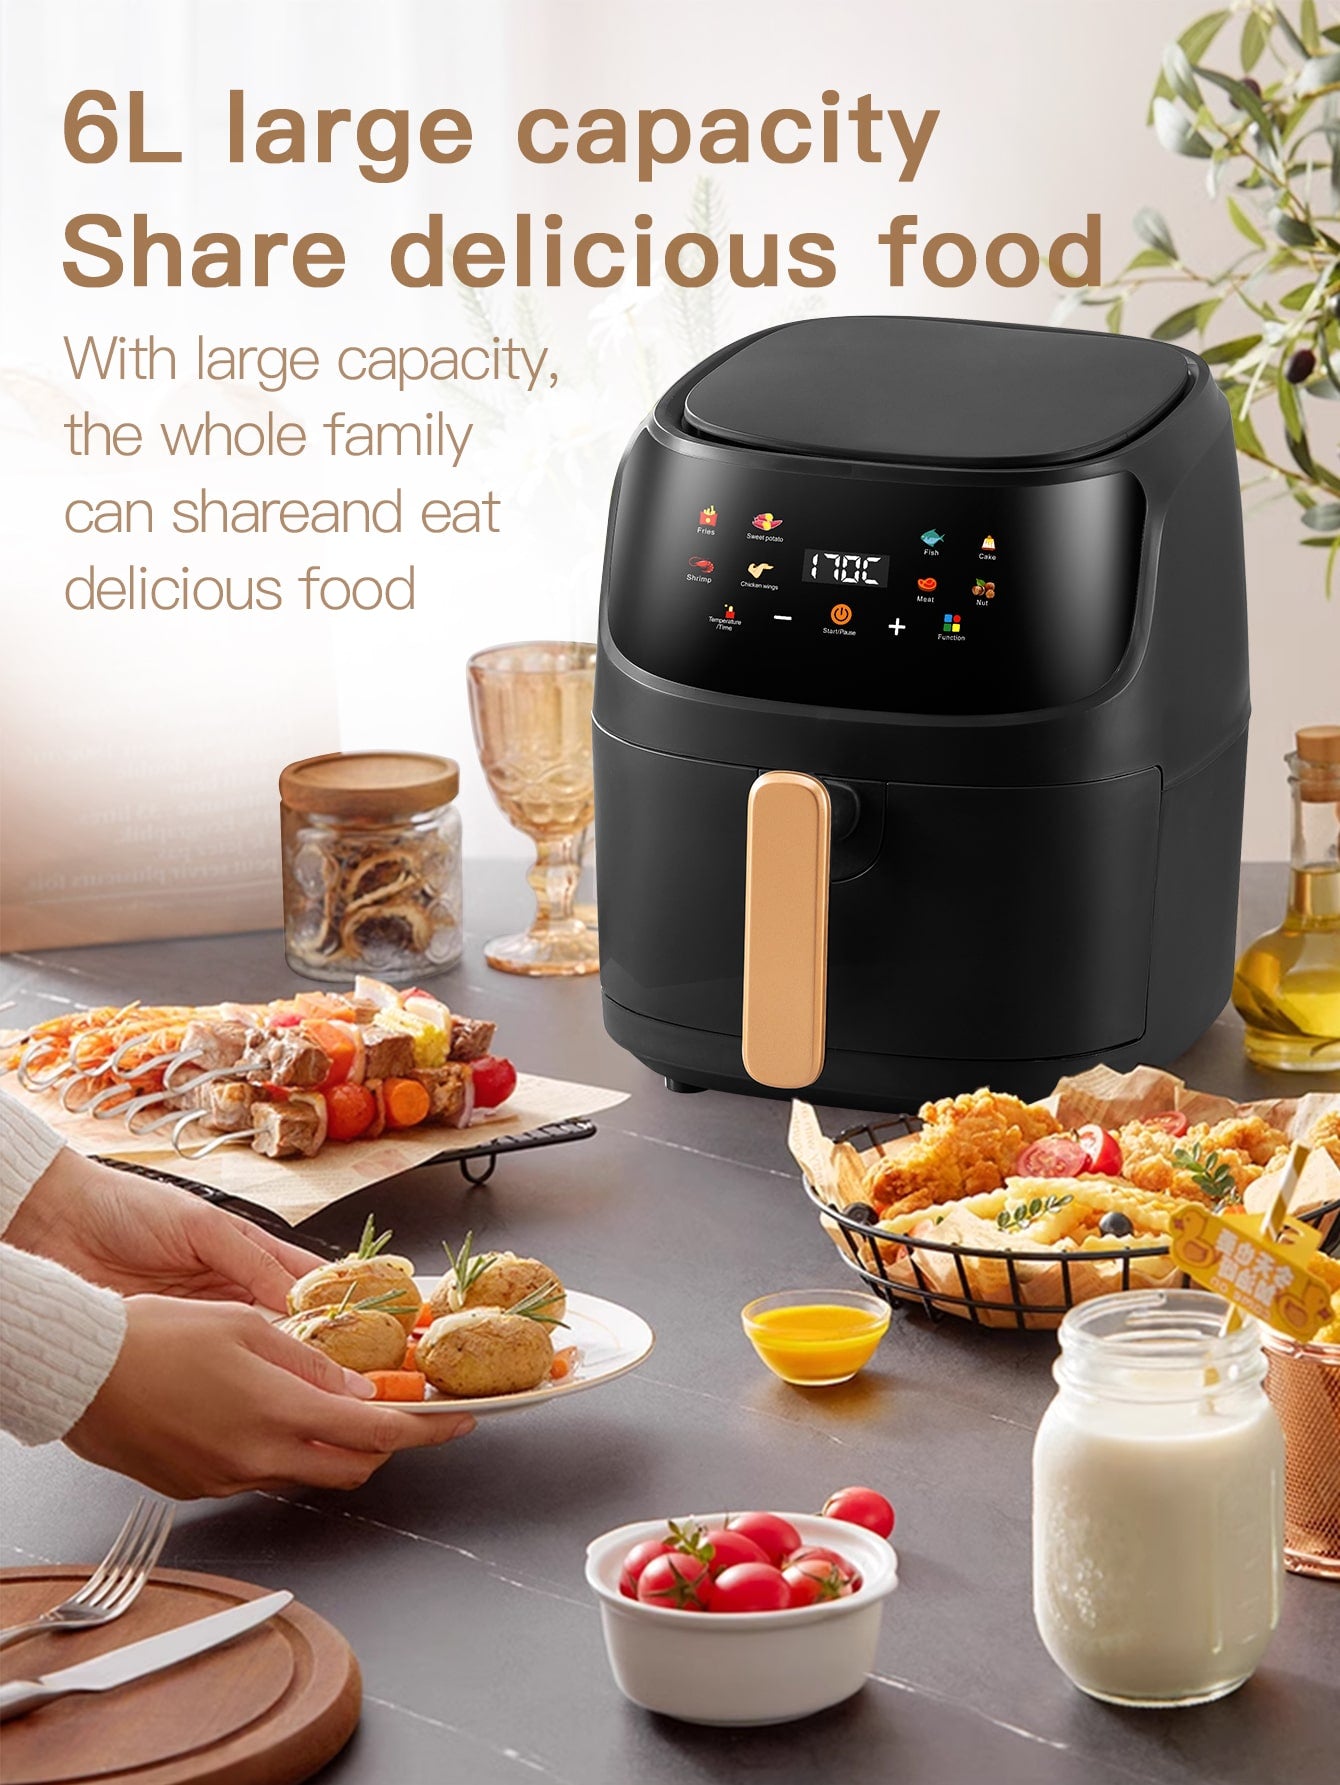 1pc 8l Large Capacity Removable Air Fryer Qf-606, Color Screen One Button Start Non-stick Inner Pot, Multifunctional Grill Machine For Cooking Meat, Chicken Wings, Cakes, Bbq, Home Use-Black-3